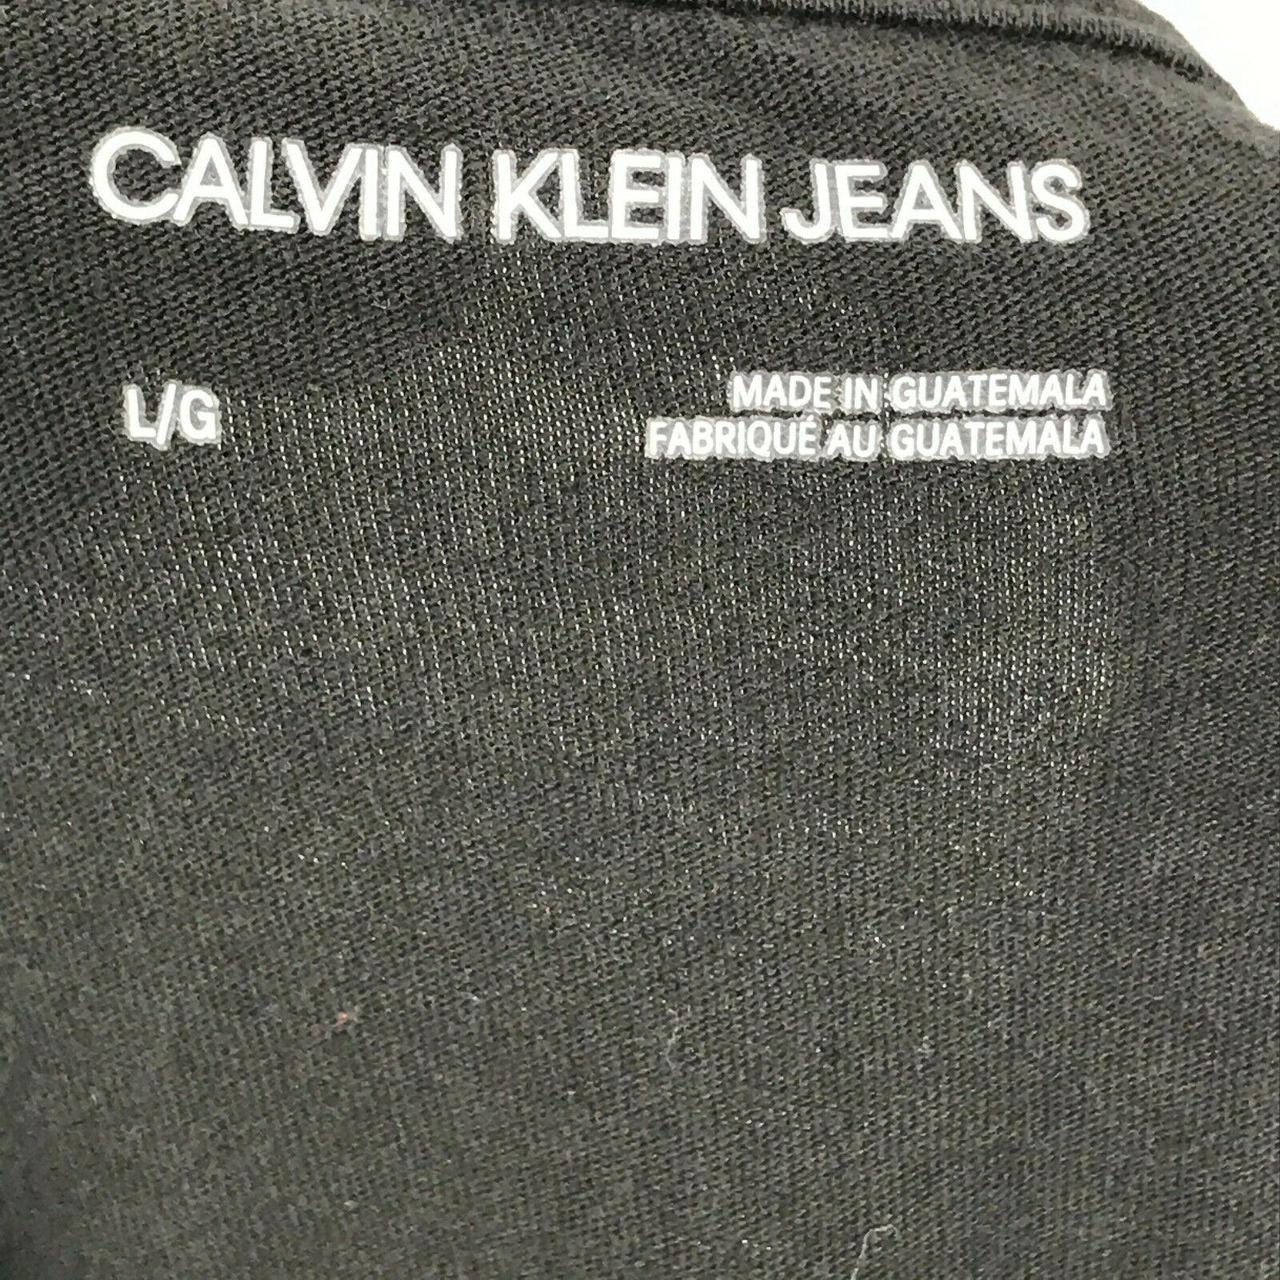 Product Image 2 - Calvin Klein Jeans T-Shirt Adult